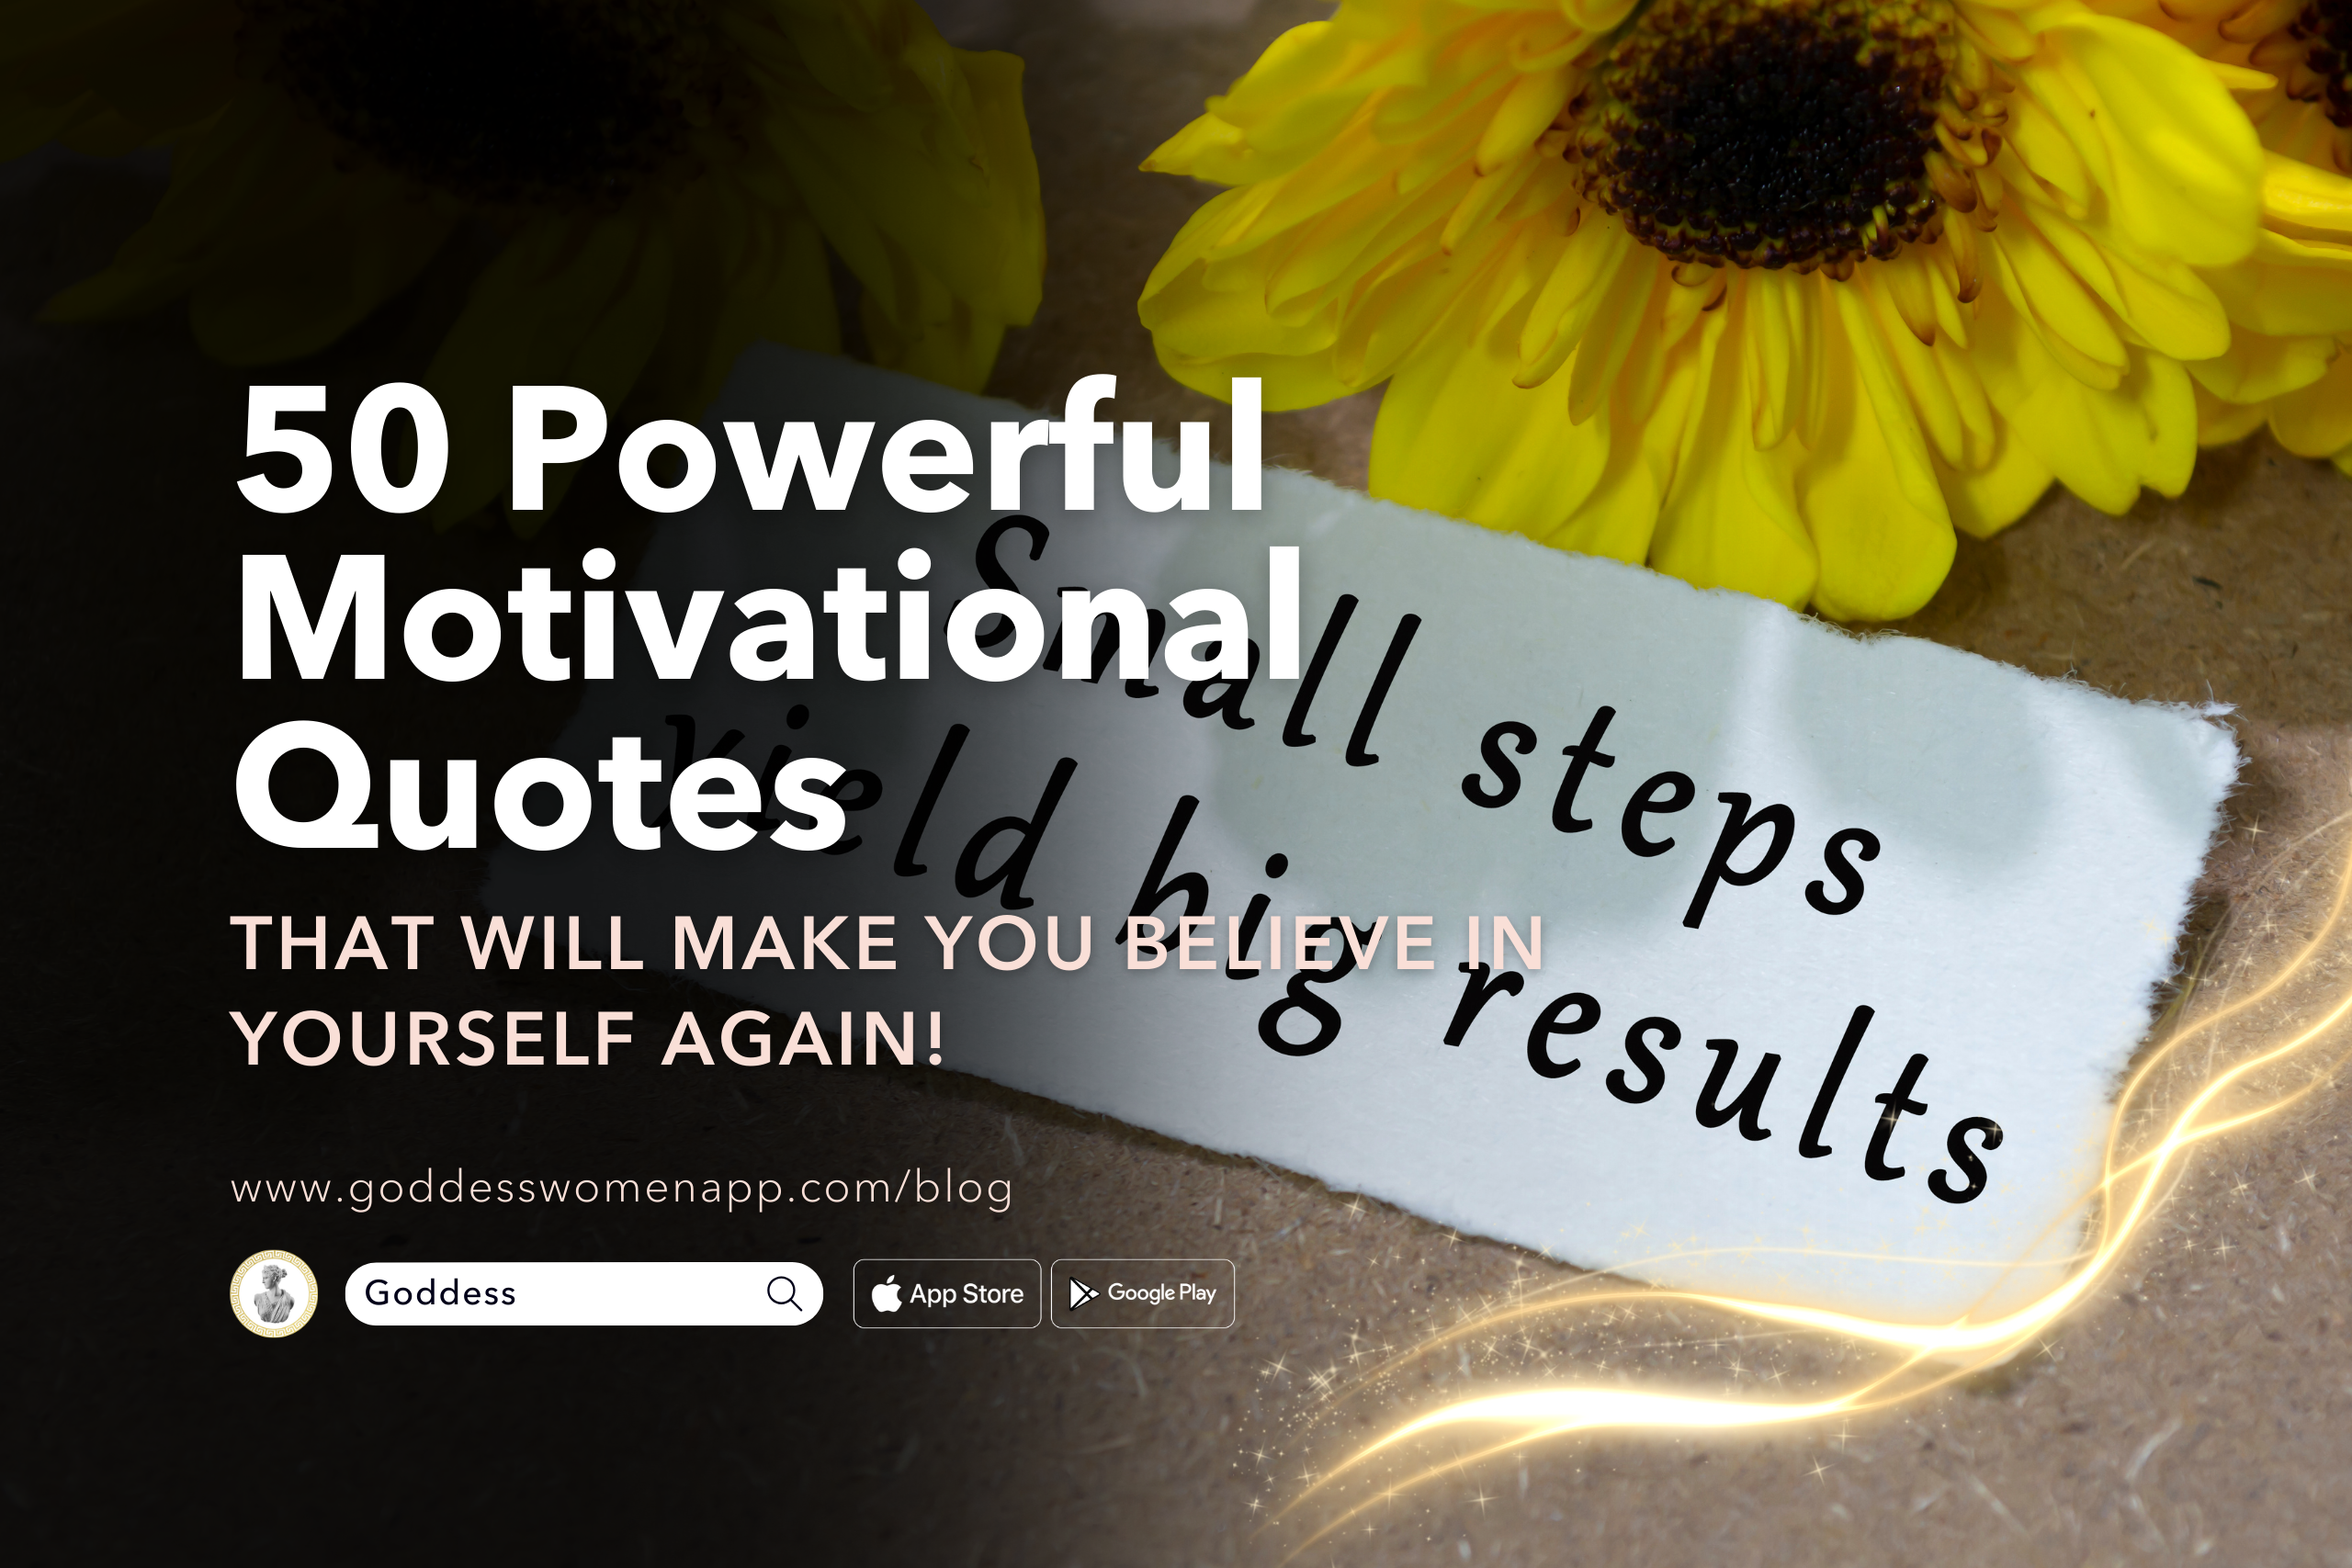 50 Powerful Motivational Quotes That Will Make You Believe in Yourself Again!